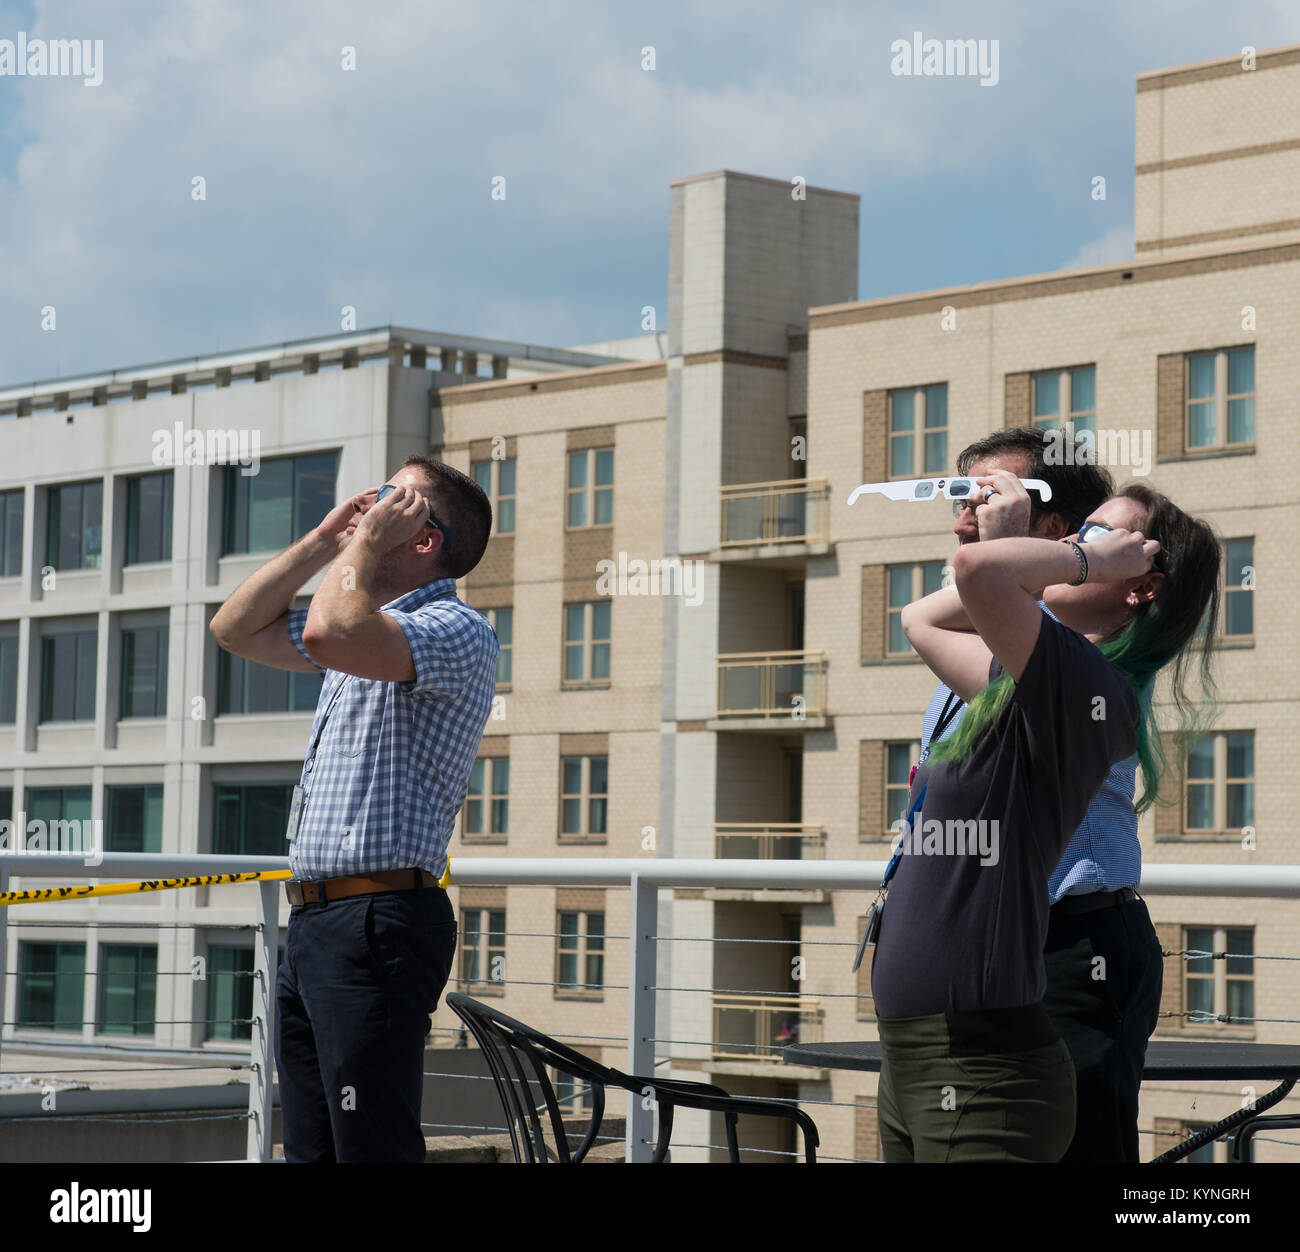 NASA employees and contractors use protective glasses to view a partial solar eclipse from NASA Headquarters Tuesday, Aug. 22, 2017 in Washington. A total solar eclipse swept across a narrow portion of the contiguous United States from Lincoln Beach, Oregon to Charleston, South Carolina. A partial solar eclipse was visible across the entire North American continent along with parts of South America, Africa, and Europe.  Photo Credit: (NASA/Gwen Pitman) Stock Photo